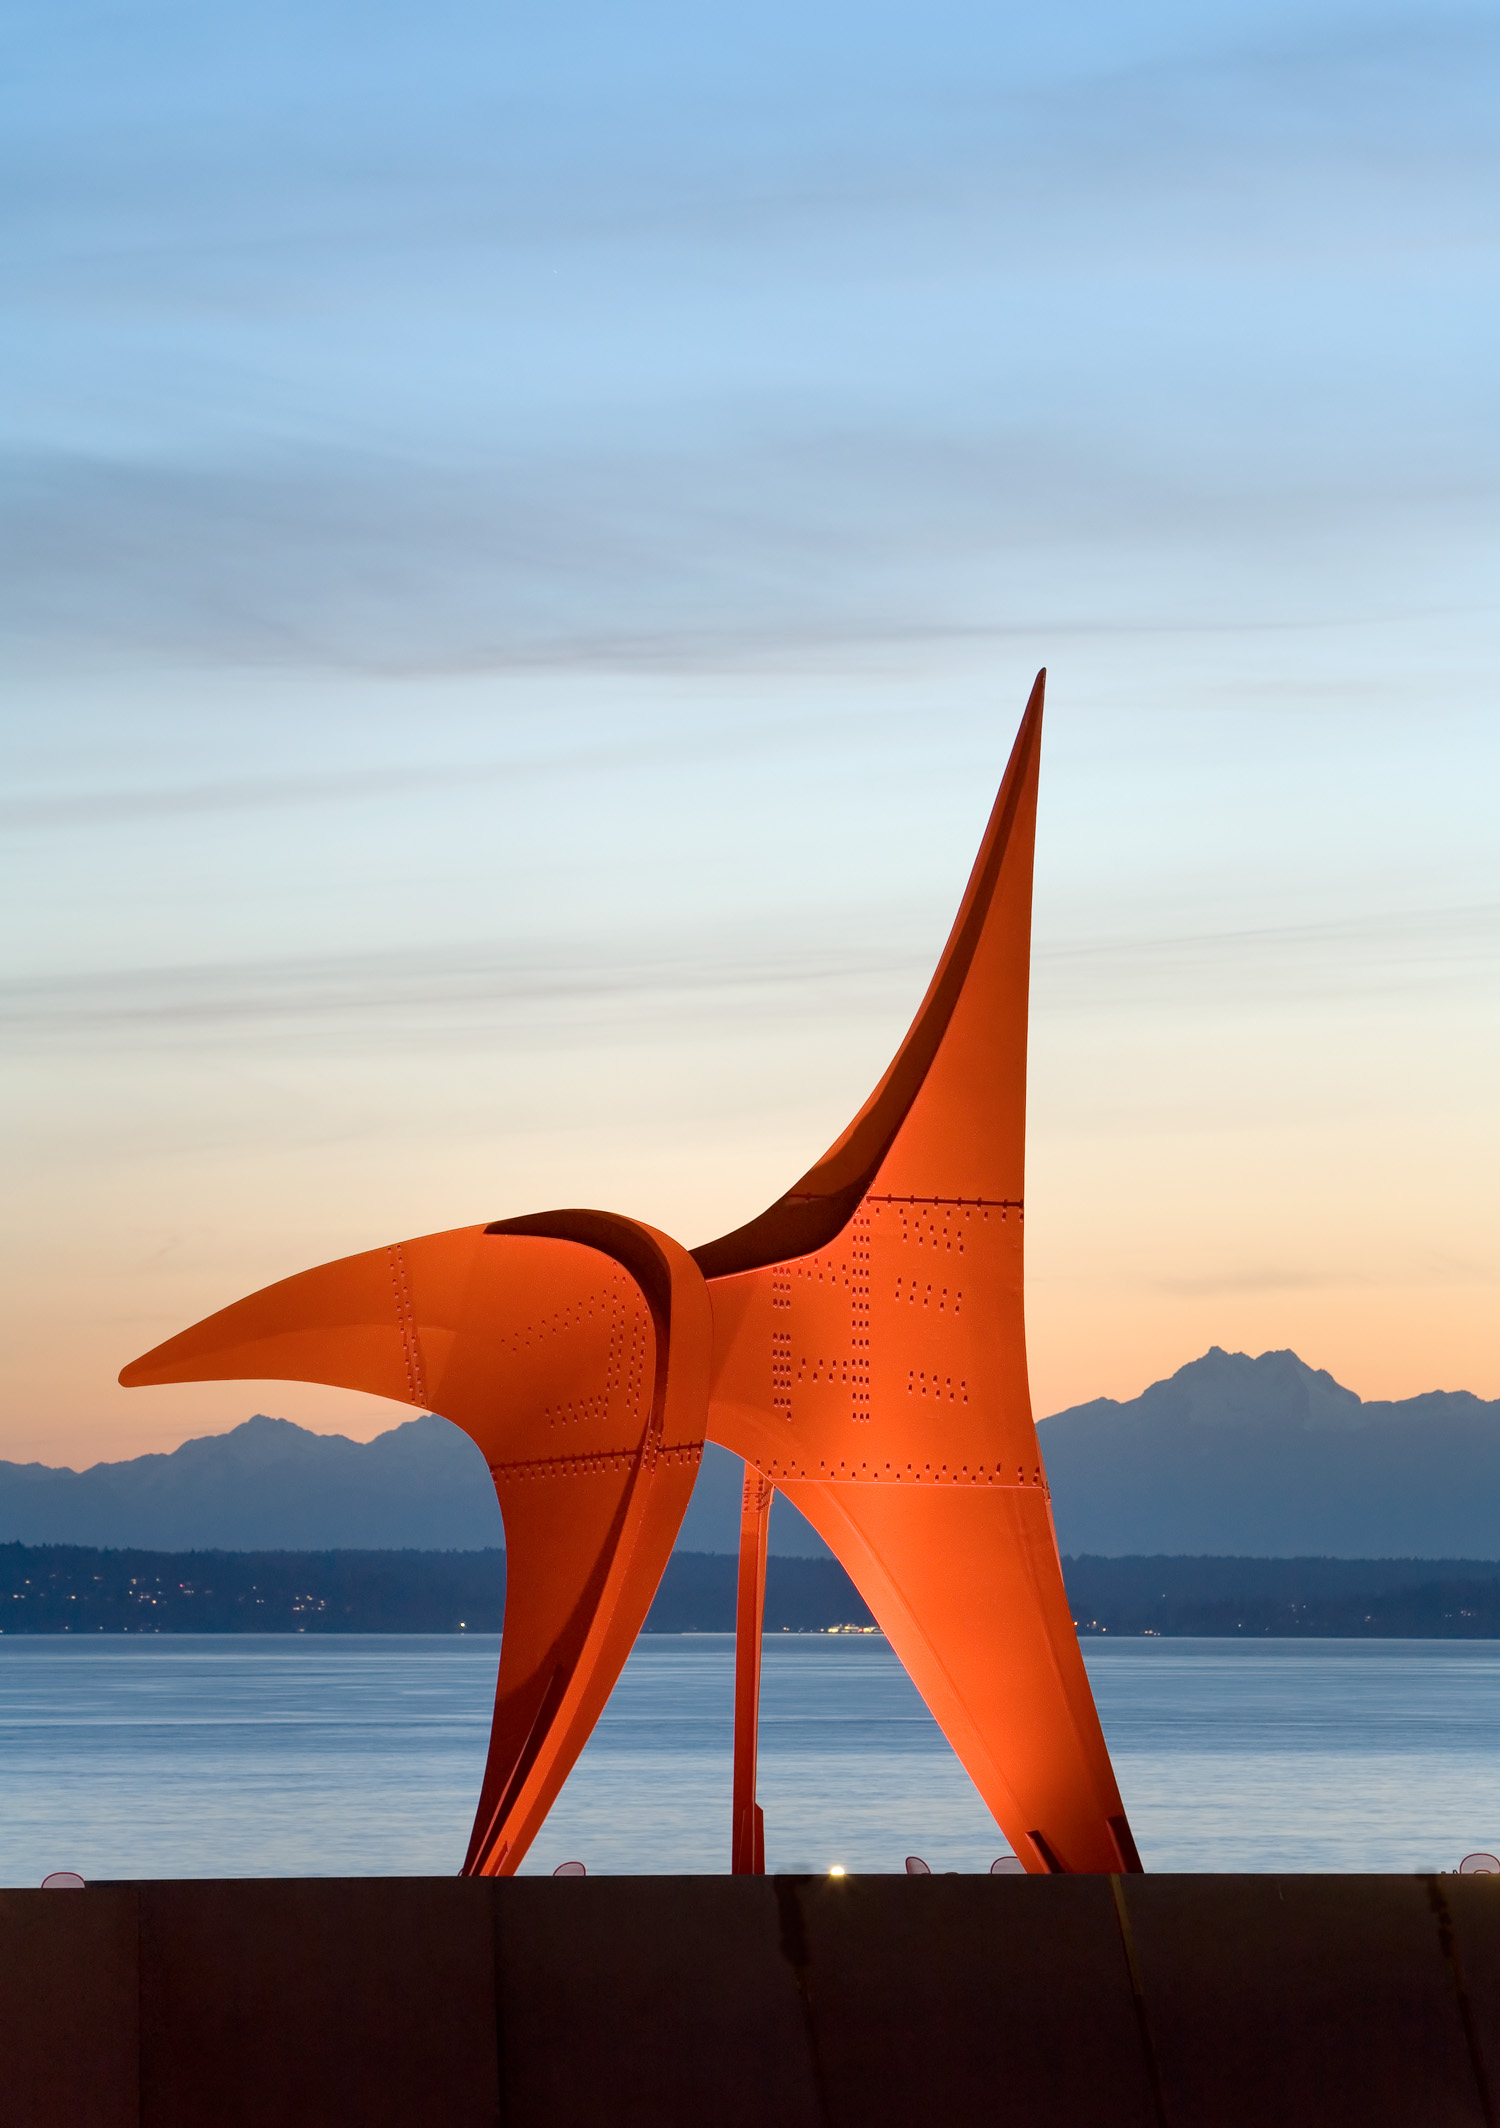 Sculpture on the water: Seattle, WA